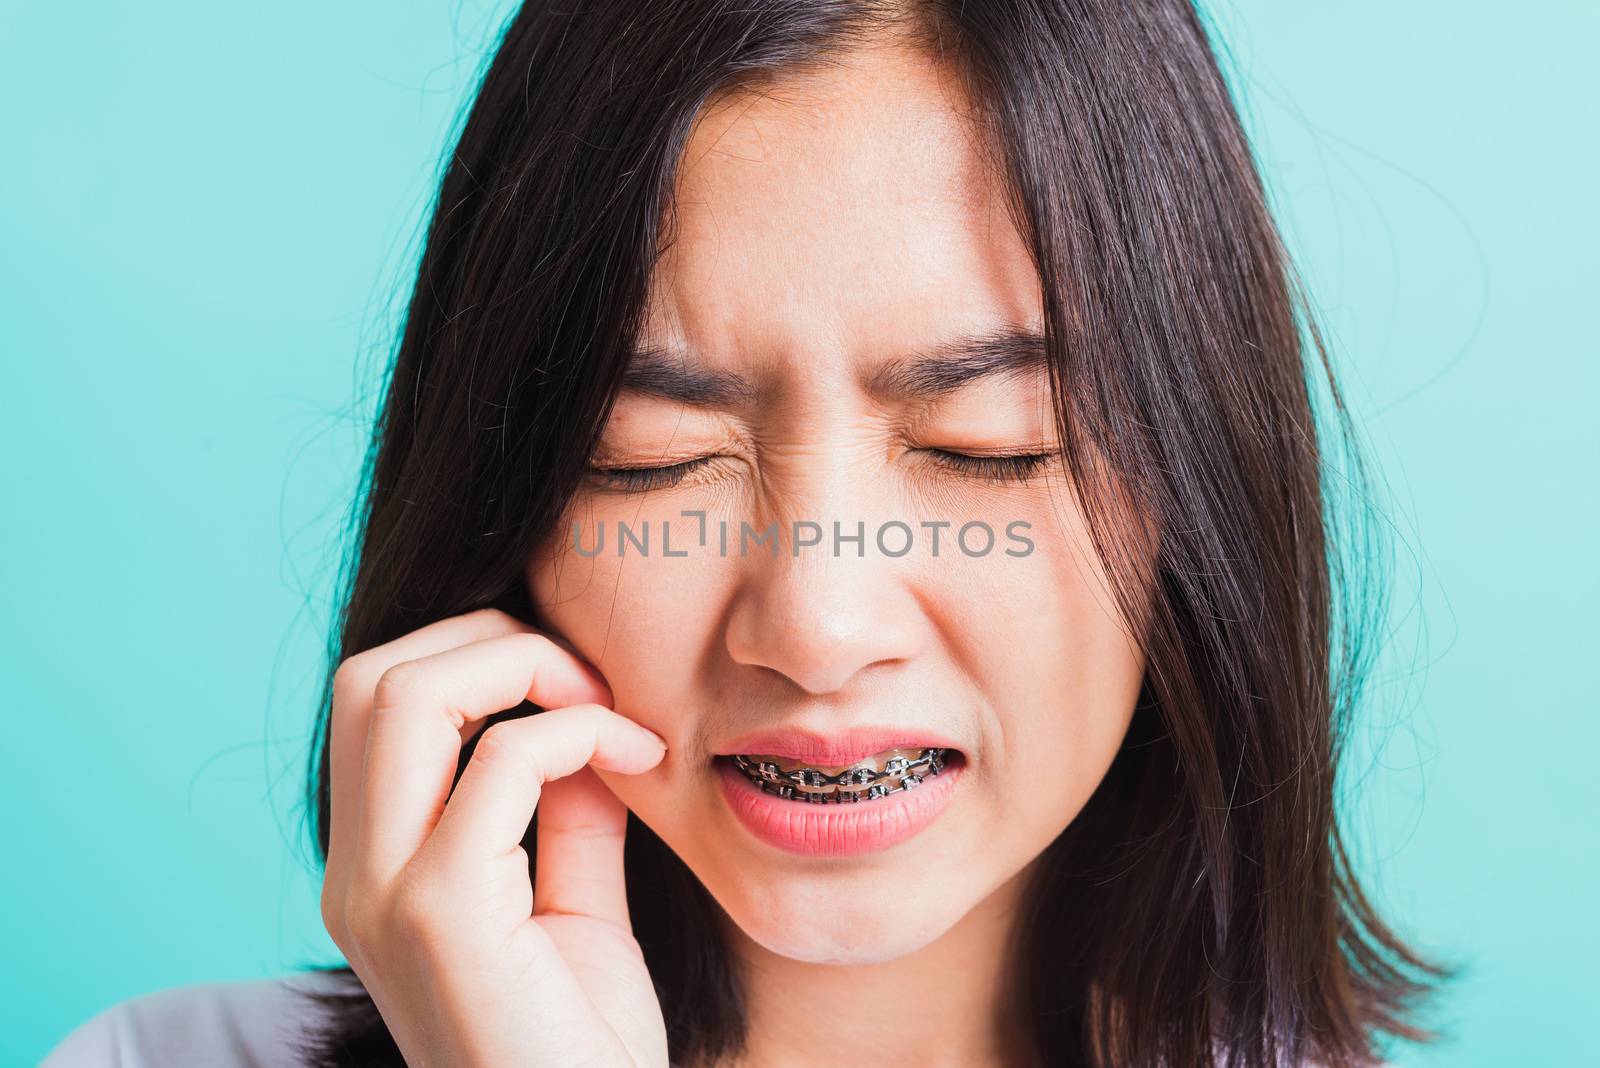 woman smile have dental braces on teeth laughing she unhappy pai by Sorapop